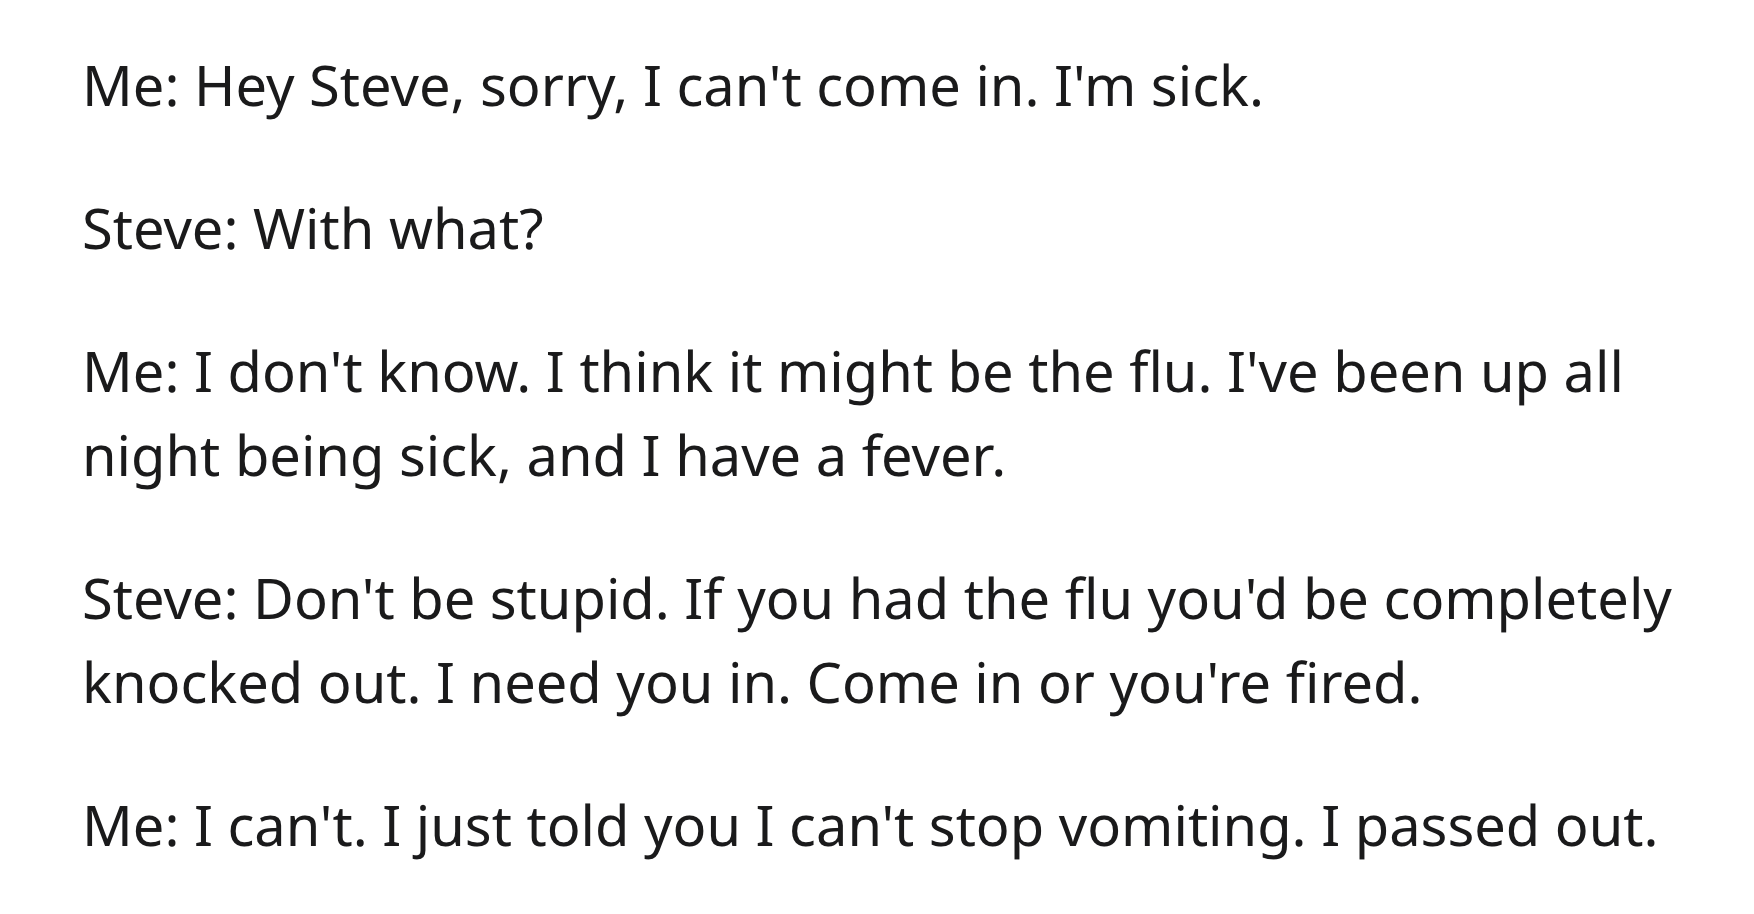 Boss Illegally Demands Doctor’s Note, So Doctor Recommends 2 Weeks Off - angle - Me Hey Steve, sorry, I can't come in. I'm sick. Steve With what? Me I don't know. I think it might be the flu. I've been up all night being sick, and I have a fever. Steve Do